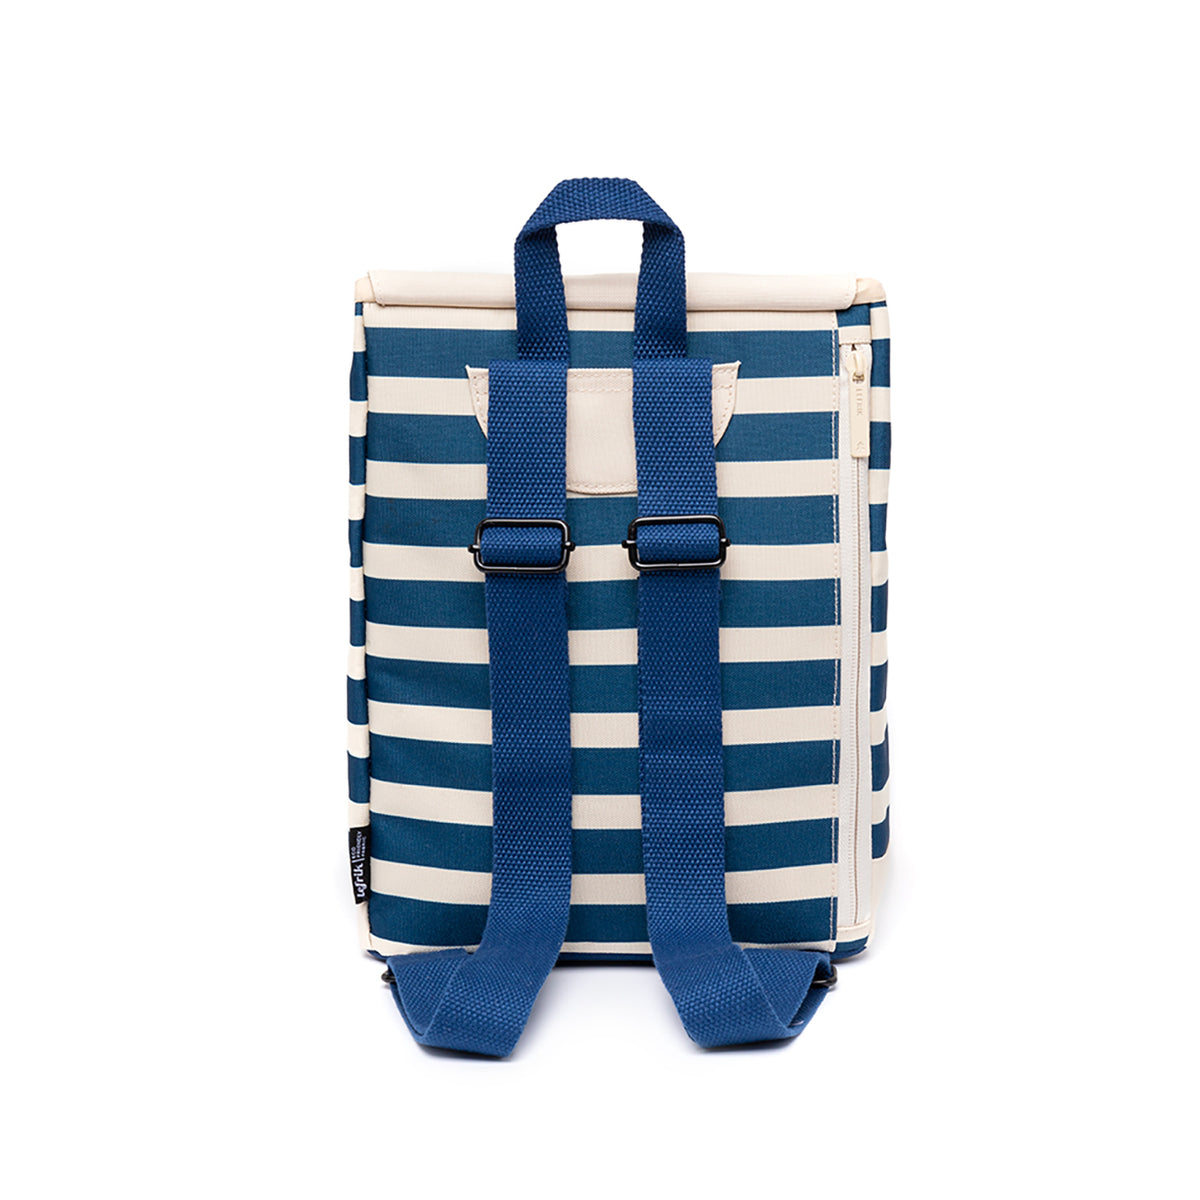 Scout Mini - Printed Marine Stripes, back view of the backpack